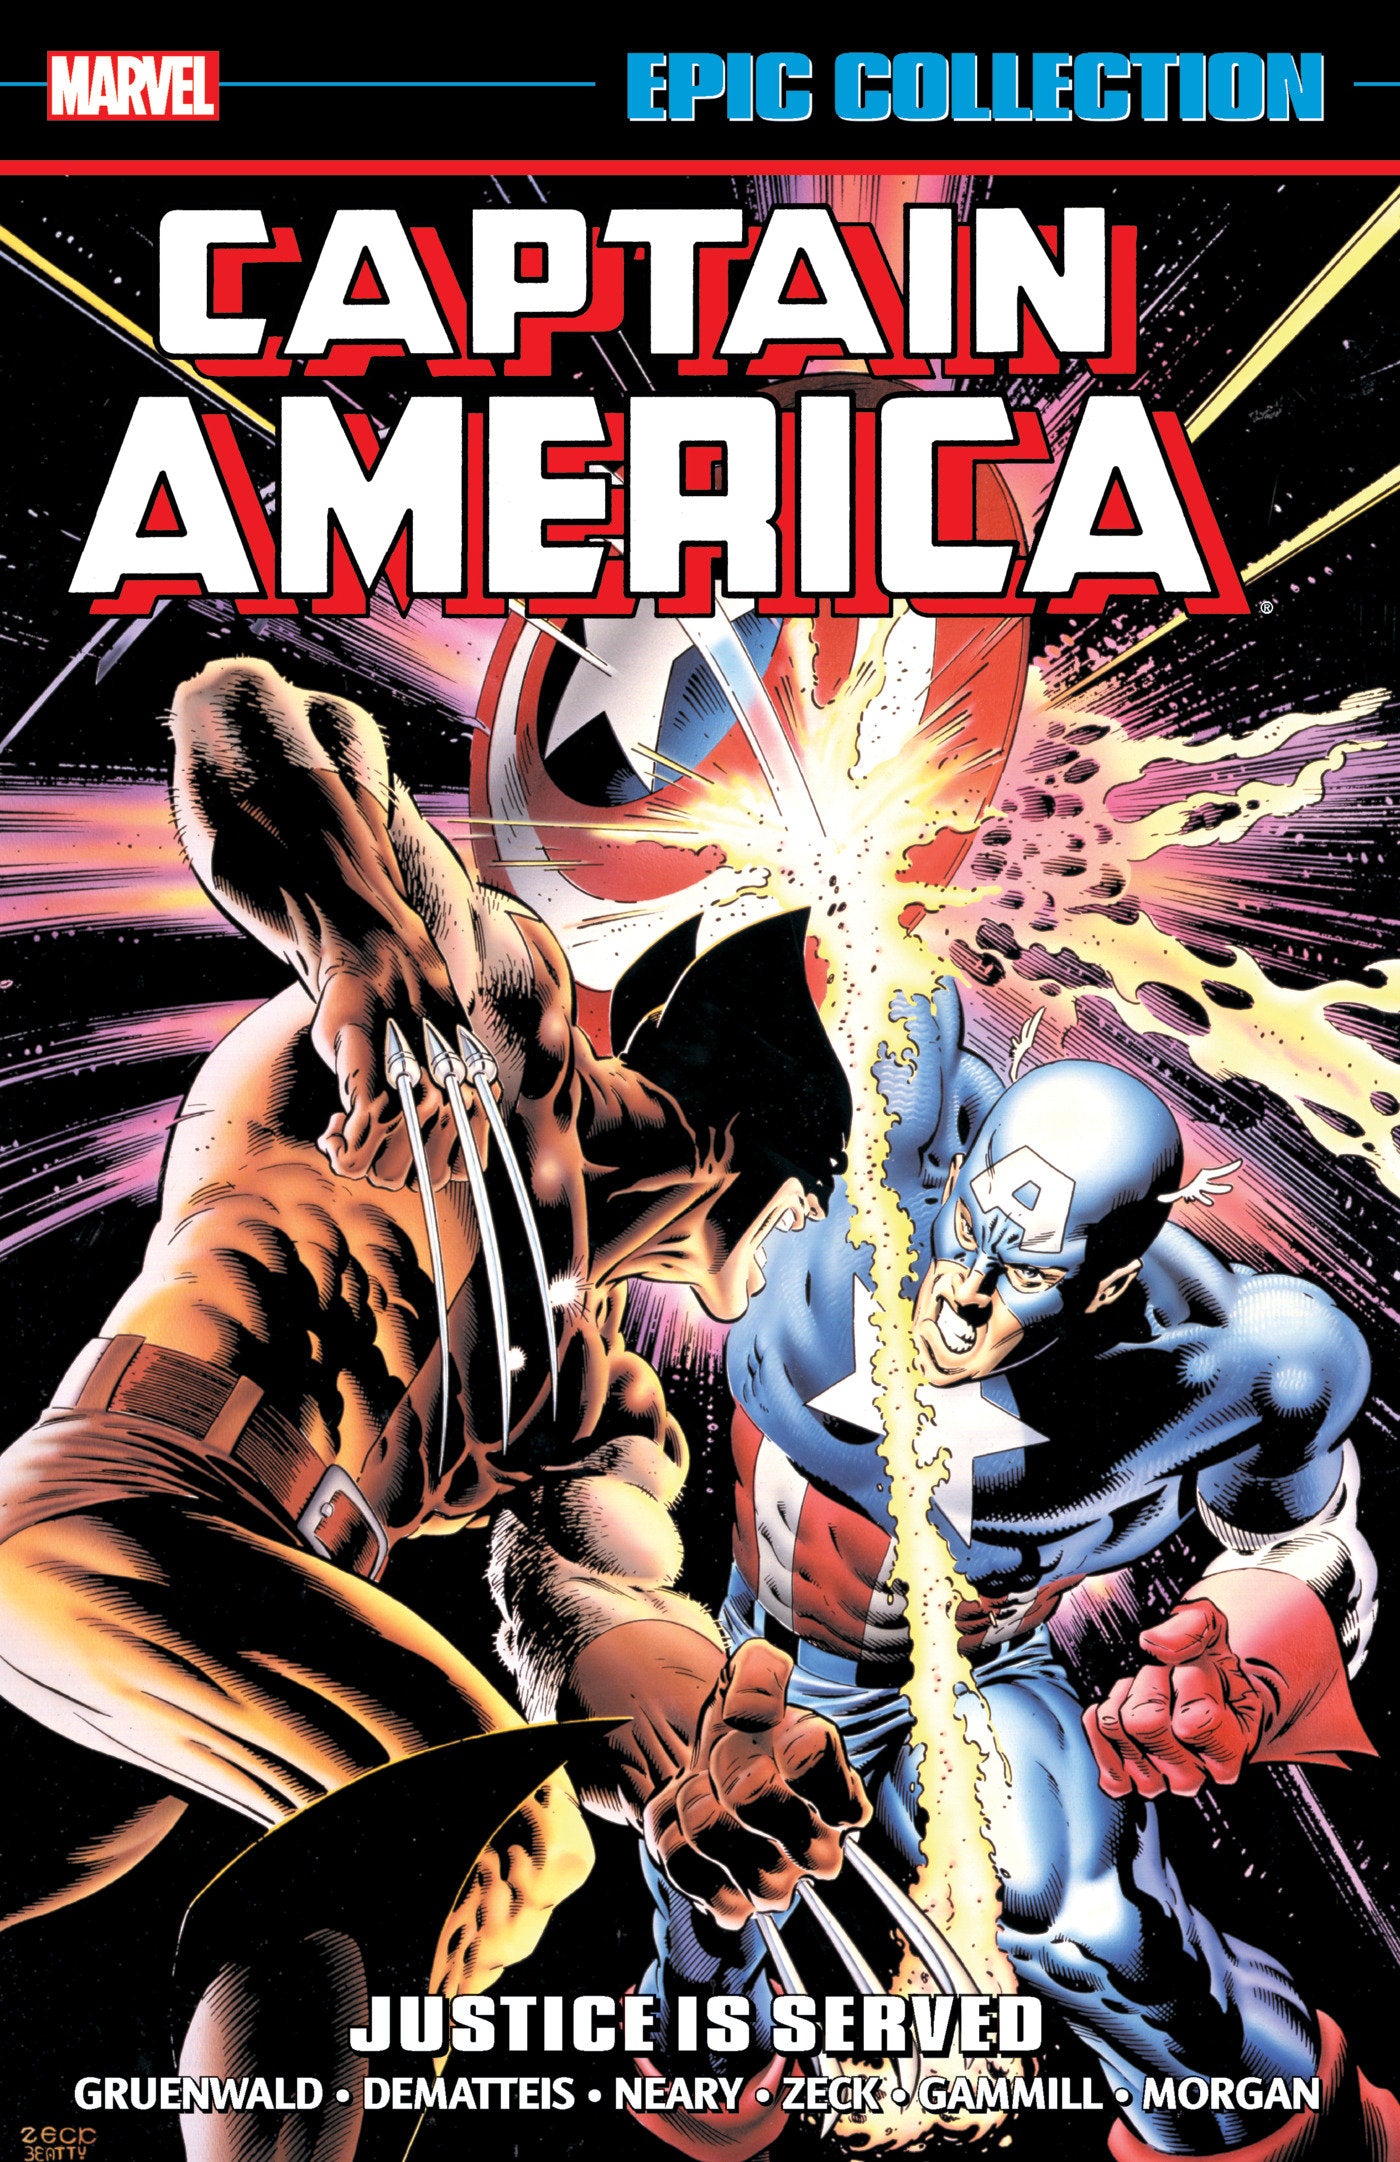 CAPTAIN AMERICA EPIC COLLECTION: JUSTICE IS SERVED TRADE PAPERBACK